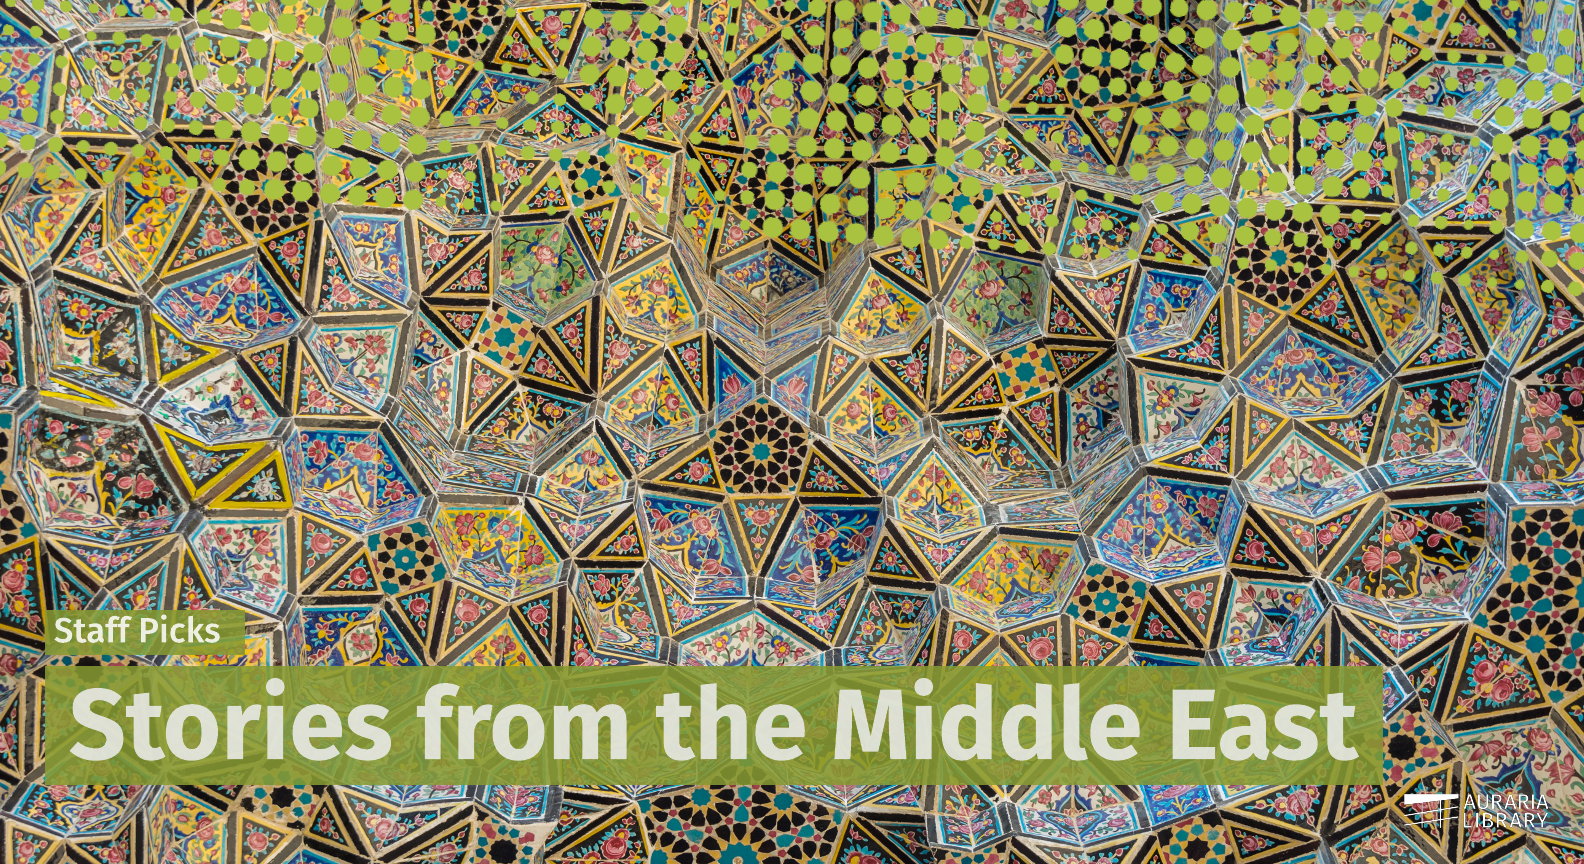 Promotional image for homepage headline: Stories from the Middle East